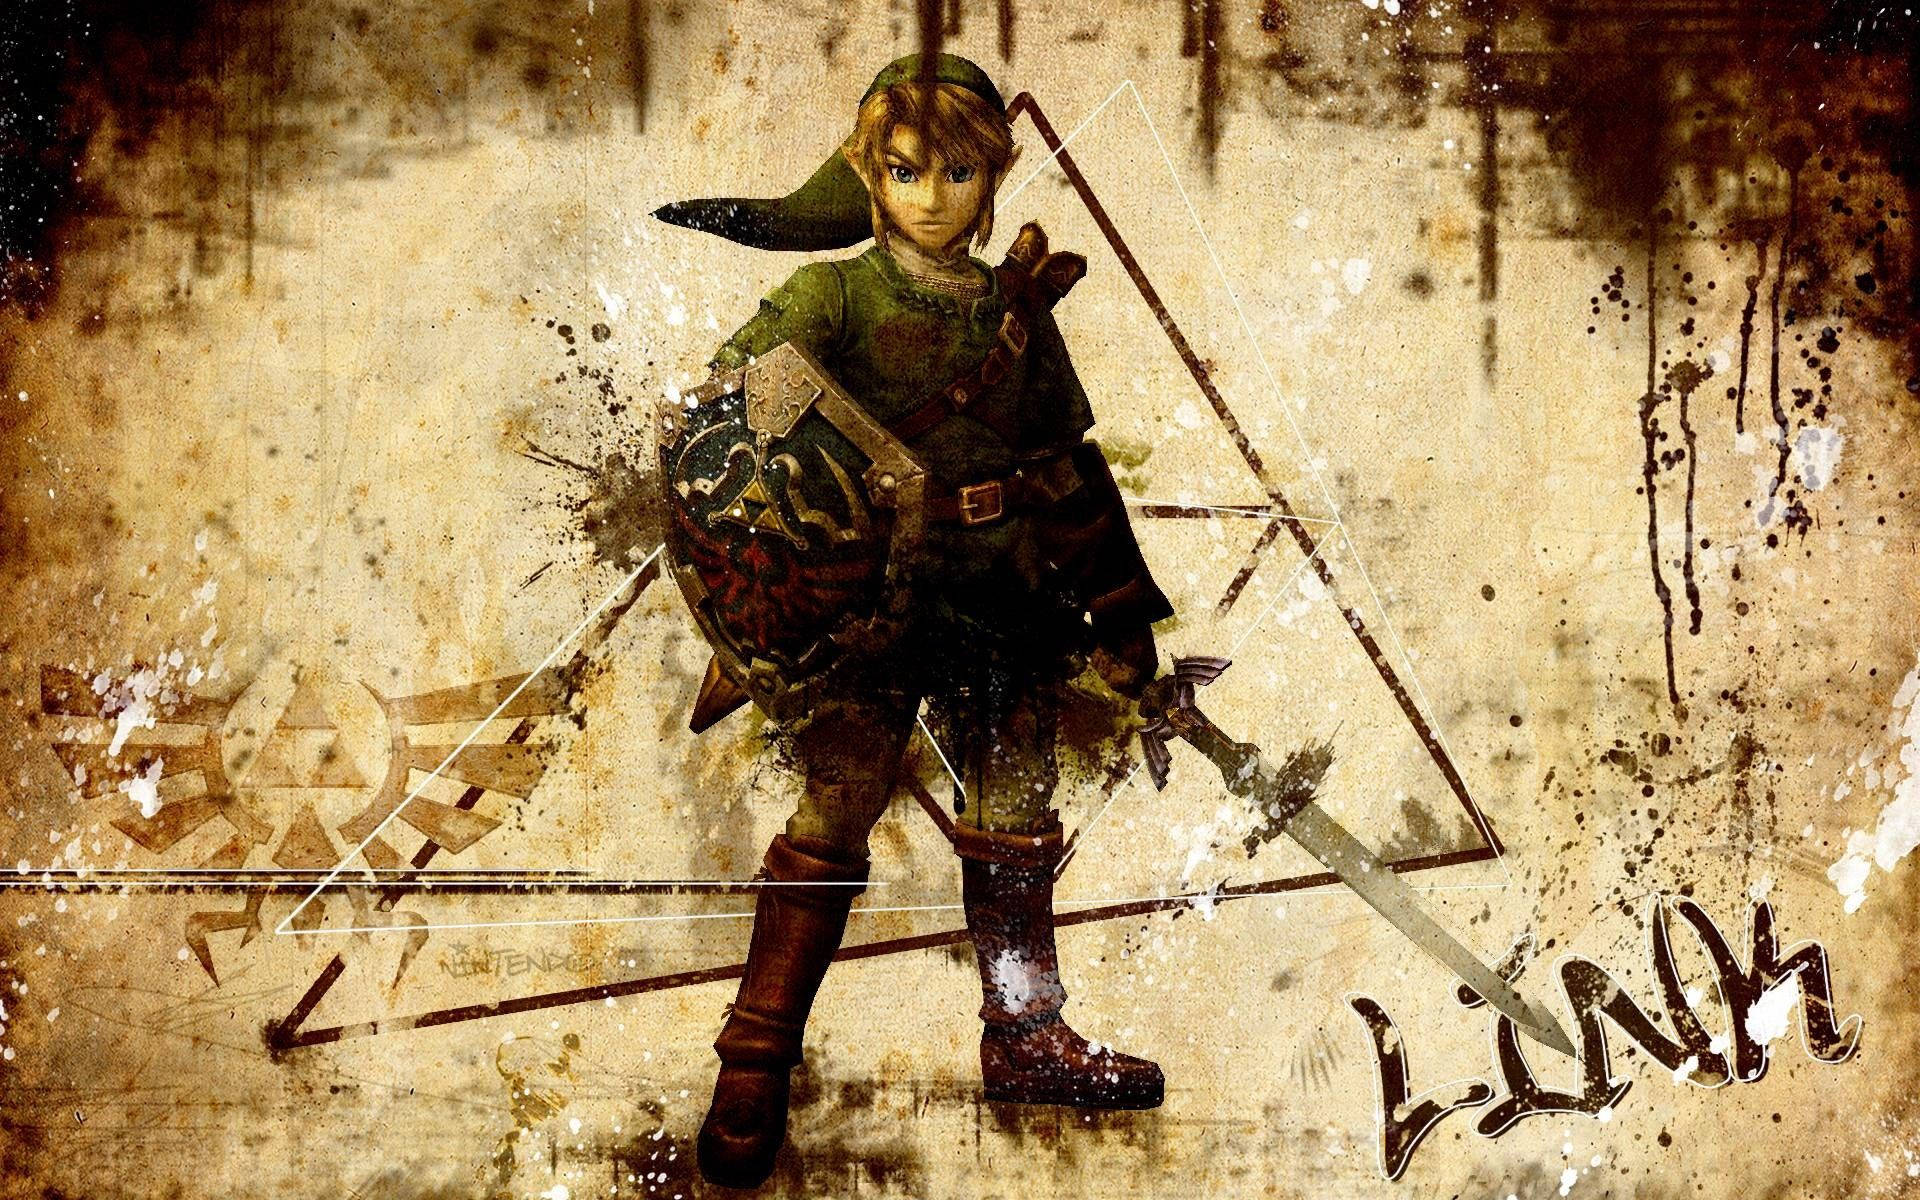 Link, The Hero Of Time Background